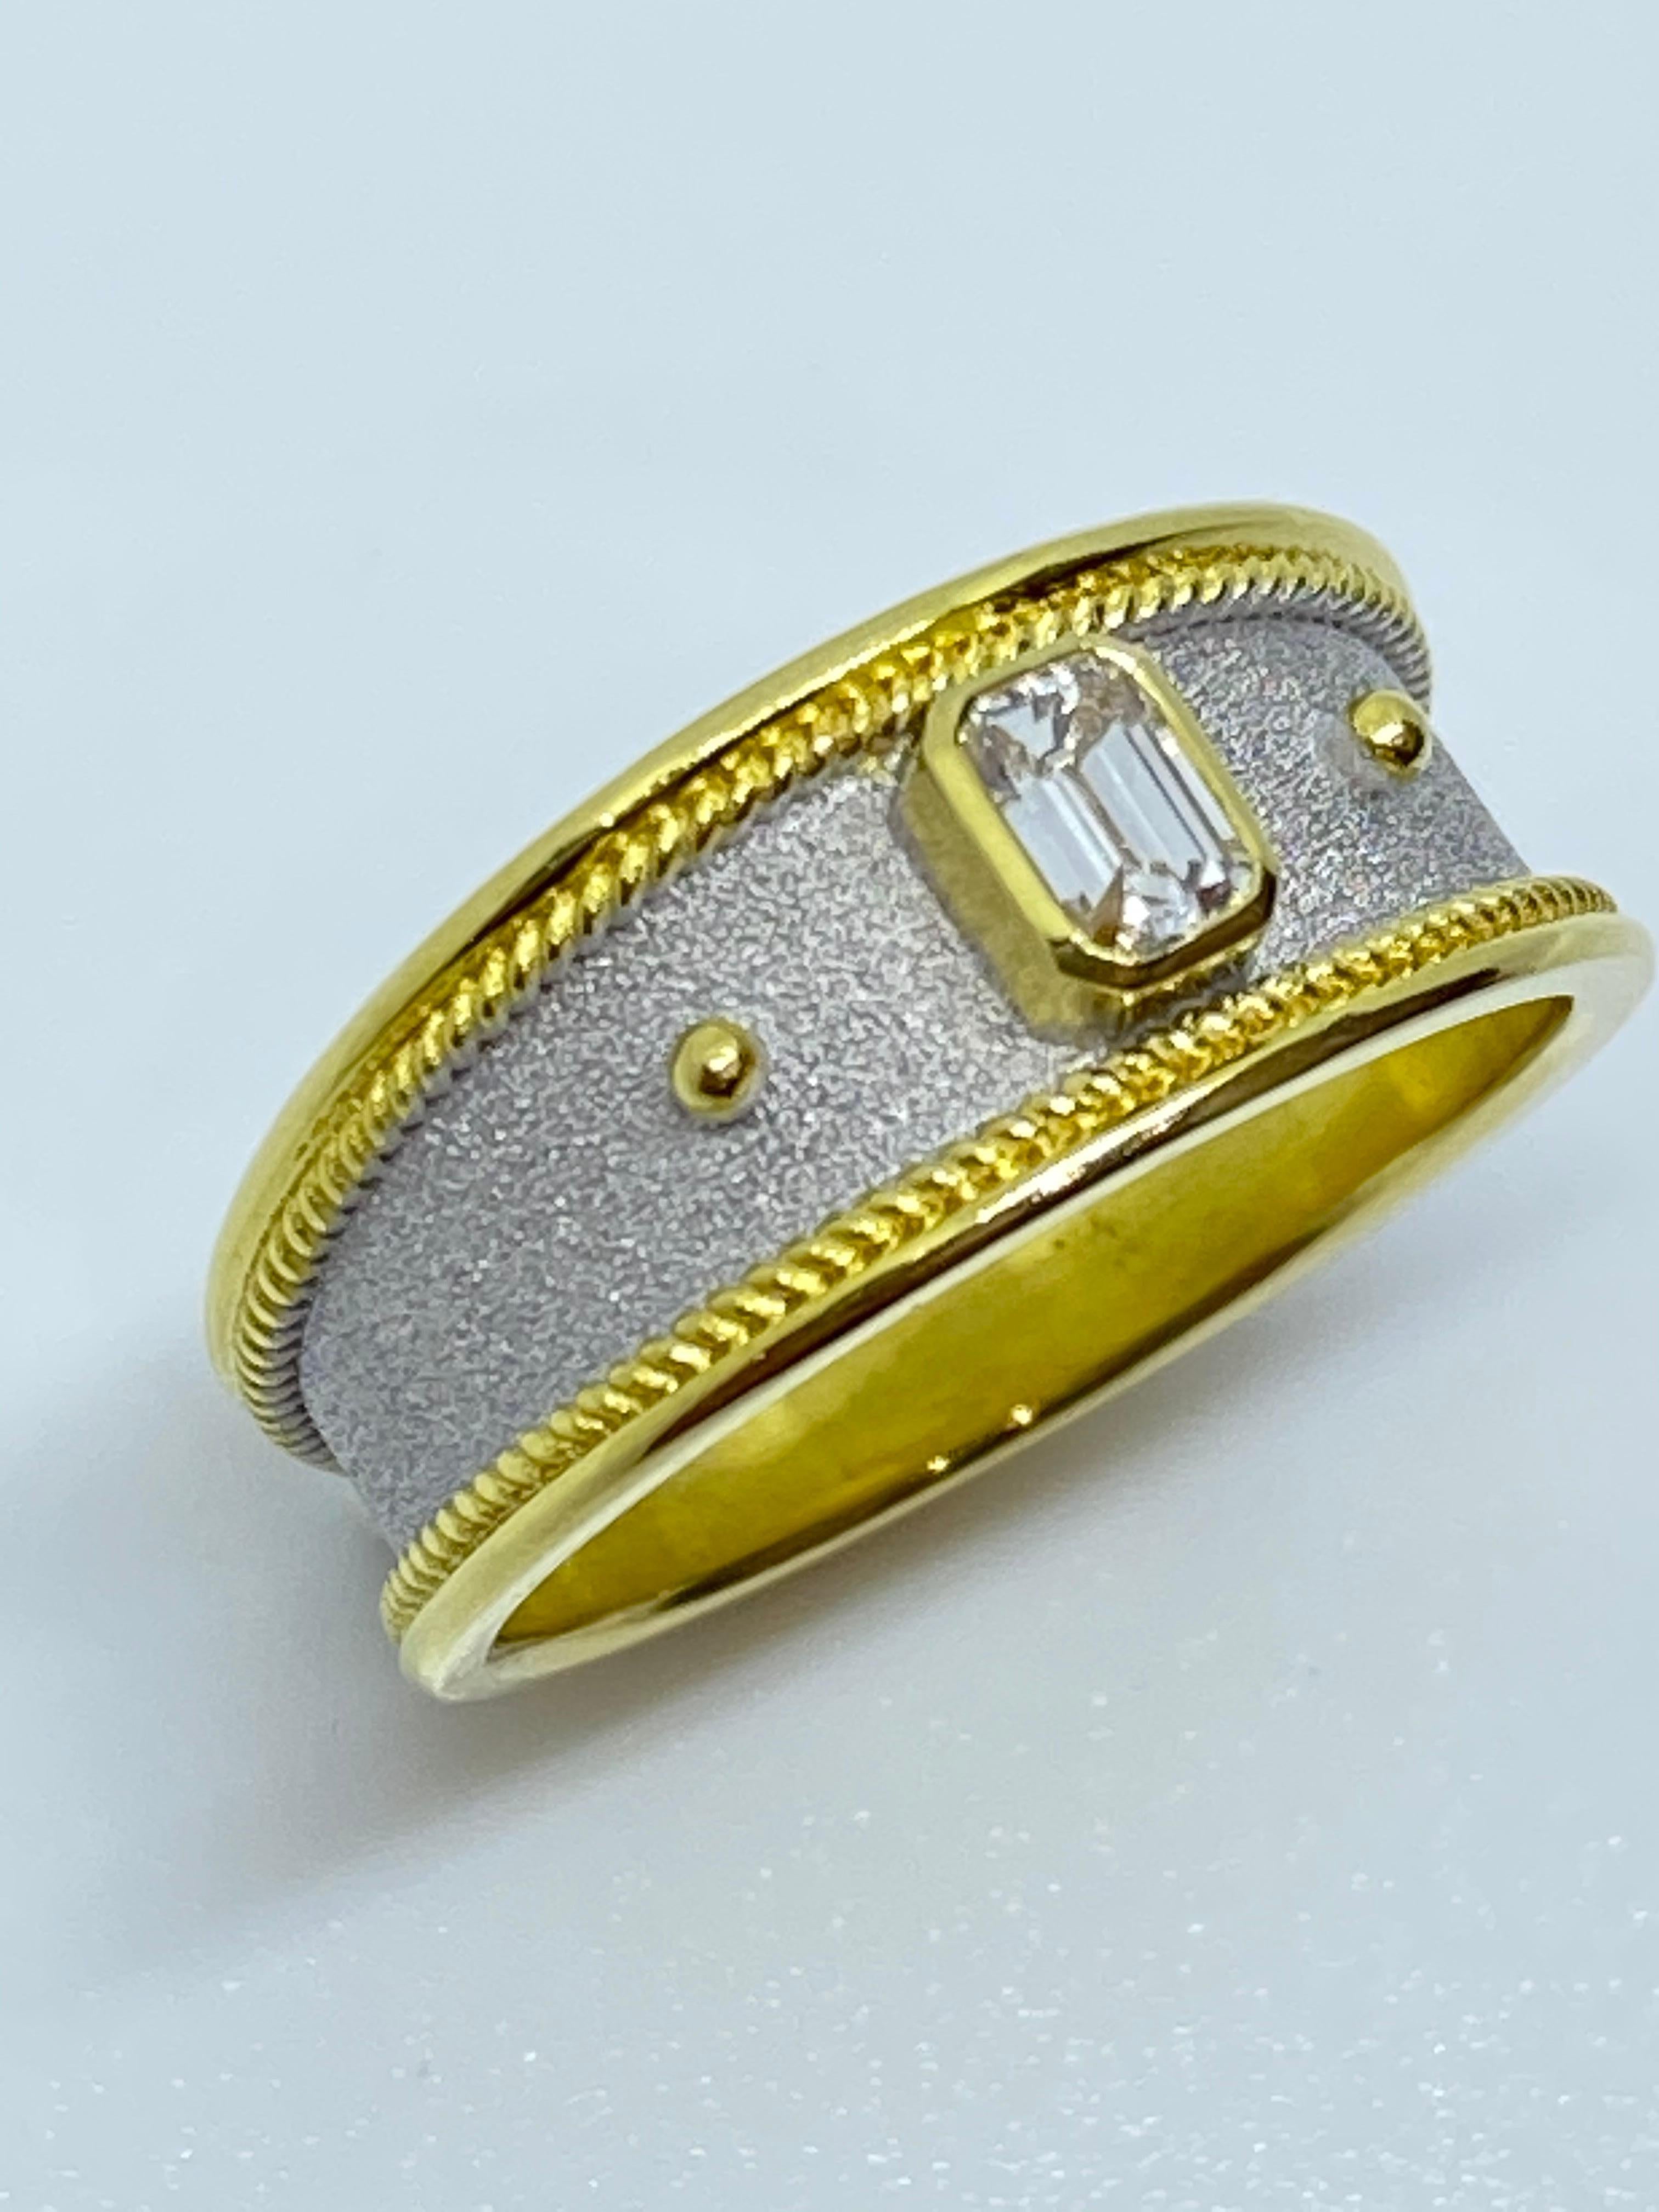 This S.Georgios designer band ring is made in 18 Karat Yellow Gold all handmade with Byzantine workmanship. This stunning piece has granulation work and a unique velvet background finished with white Rhodium. The gorgeous band ring features a VVS1